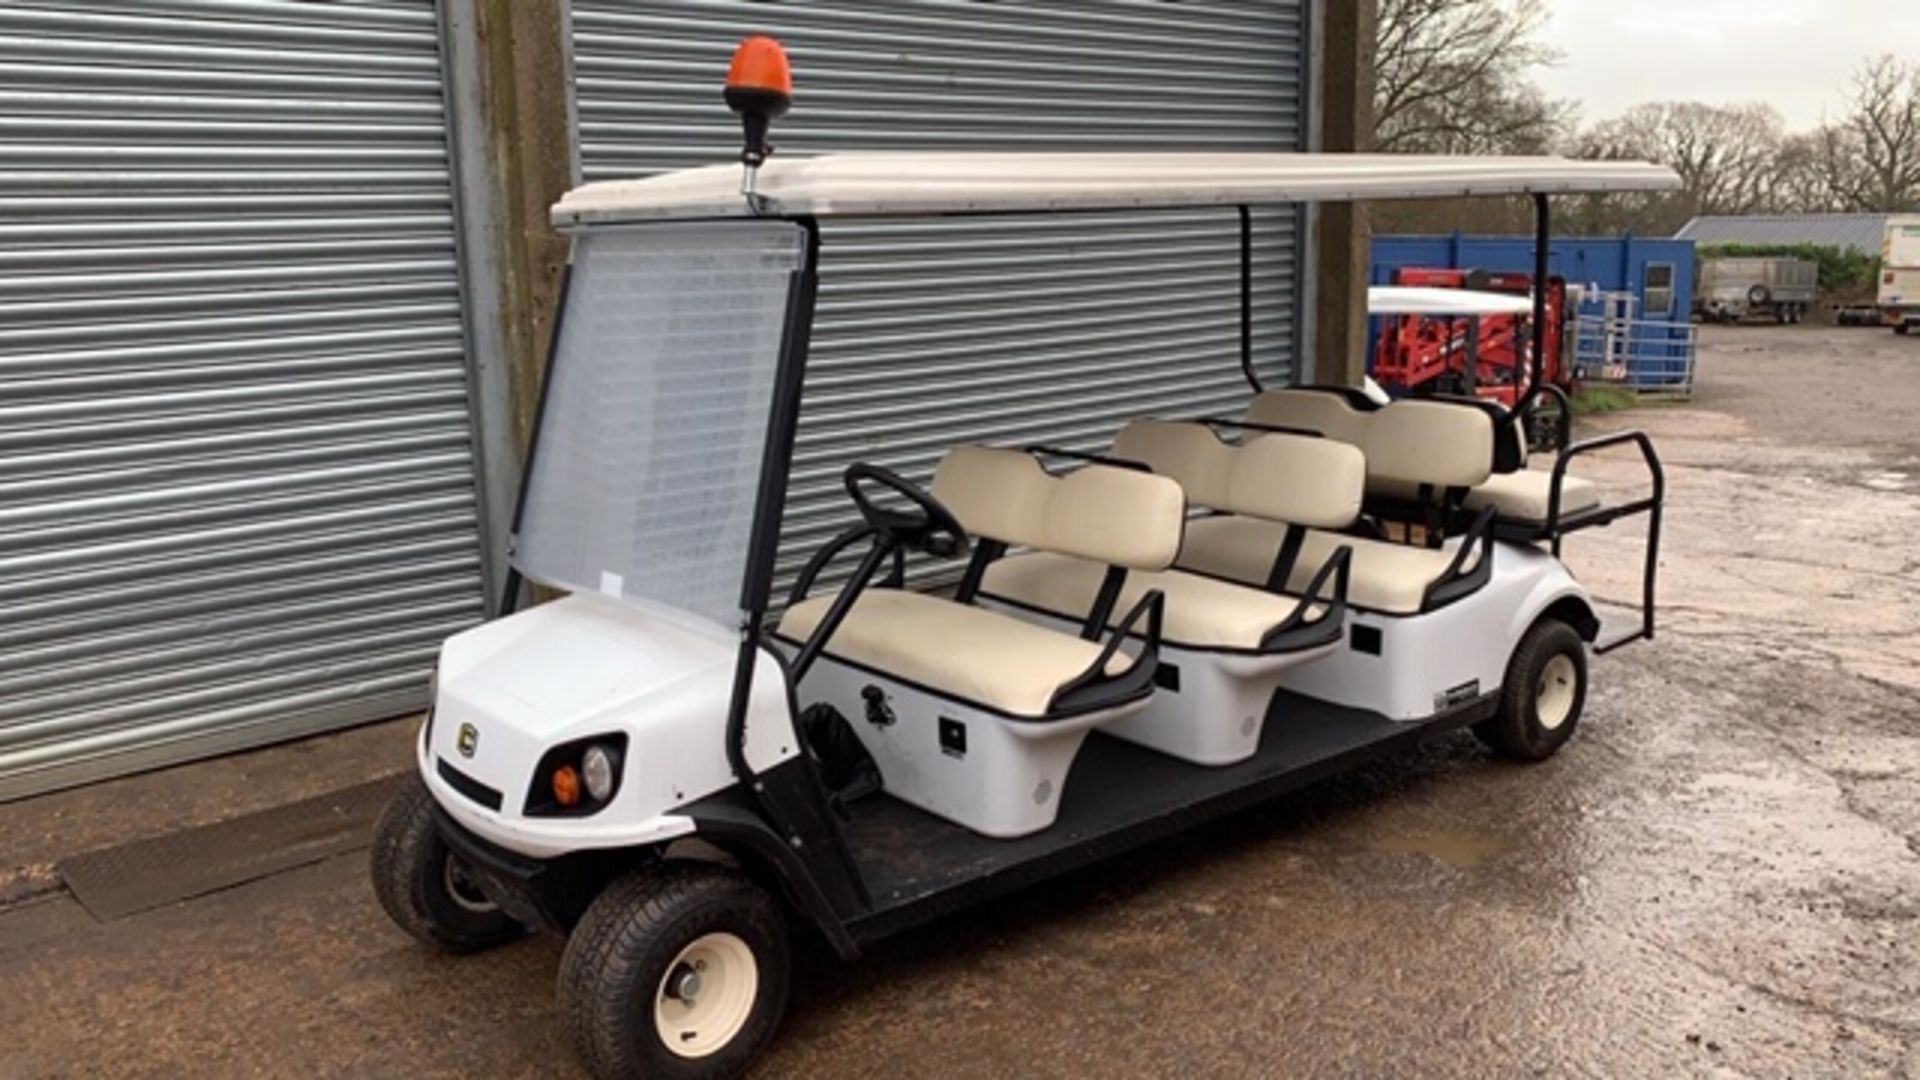 CUSHMAN EZGO SHUTTLE 8 PETROL ENGINED 8 SEATER EVENTS GOLF BUGGY. YEAR 2017 BUILD. DIRECT FROM